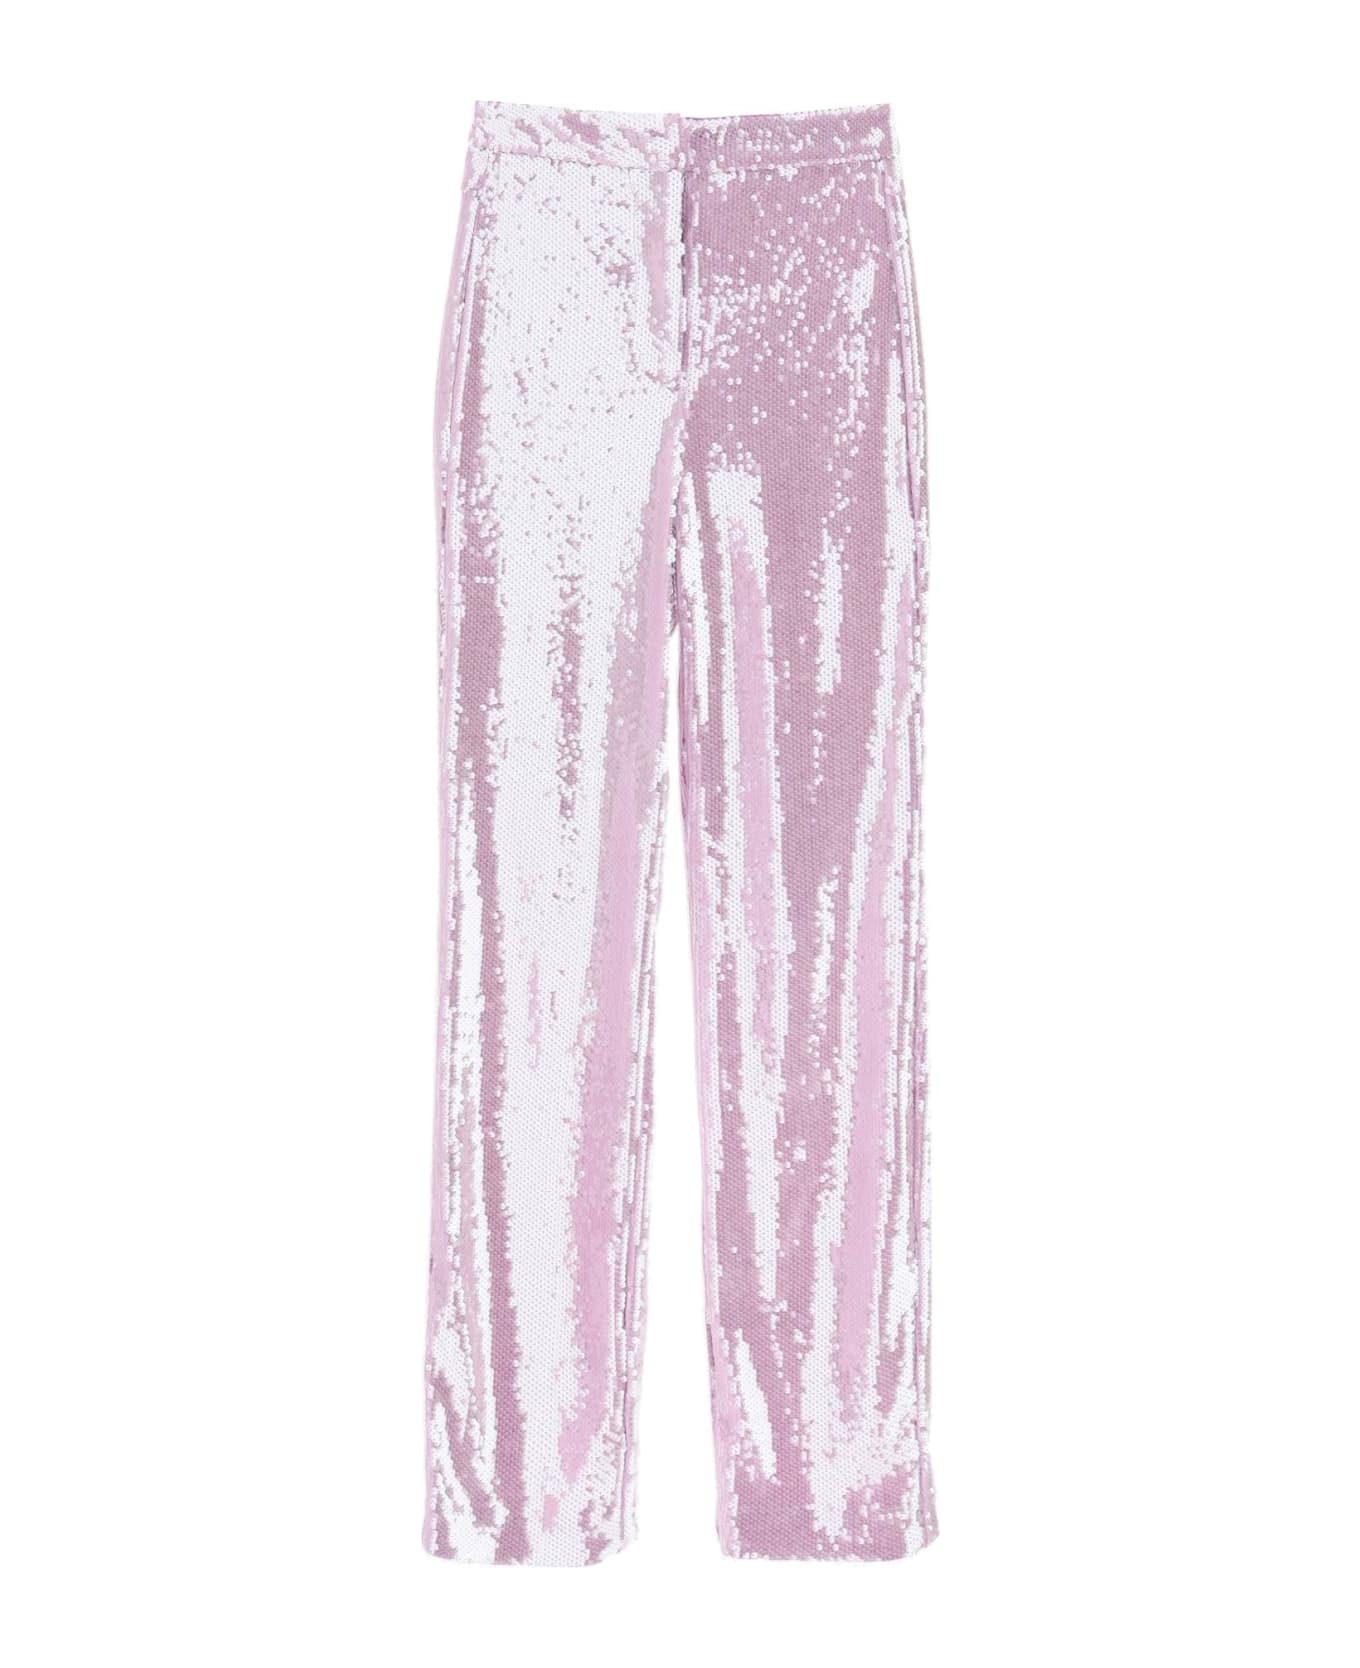 Rotate by Birger Christensen 'robyana' Sequined Pants - LUPINE (Purple)